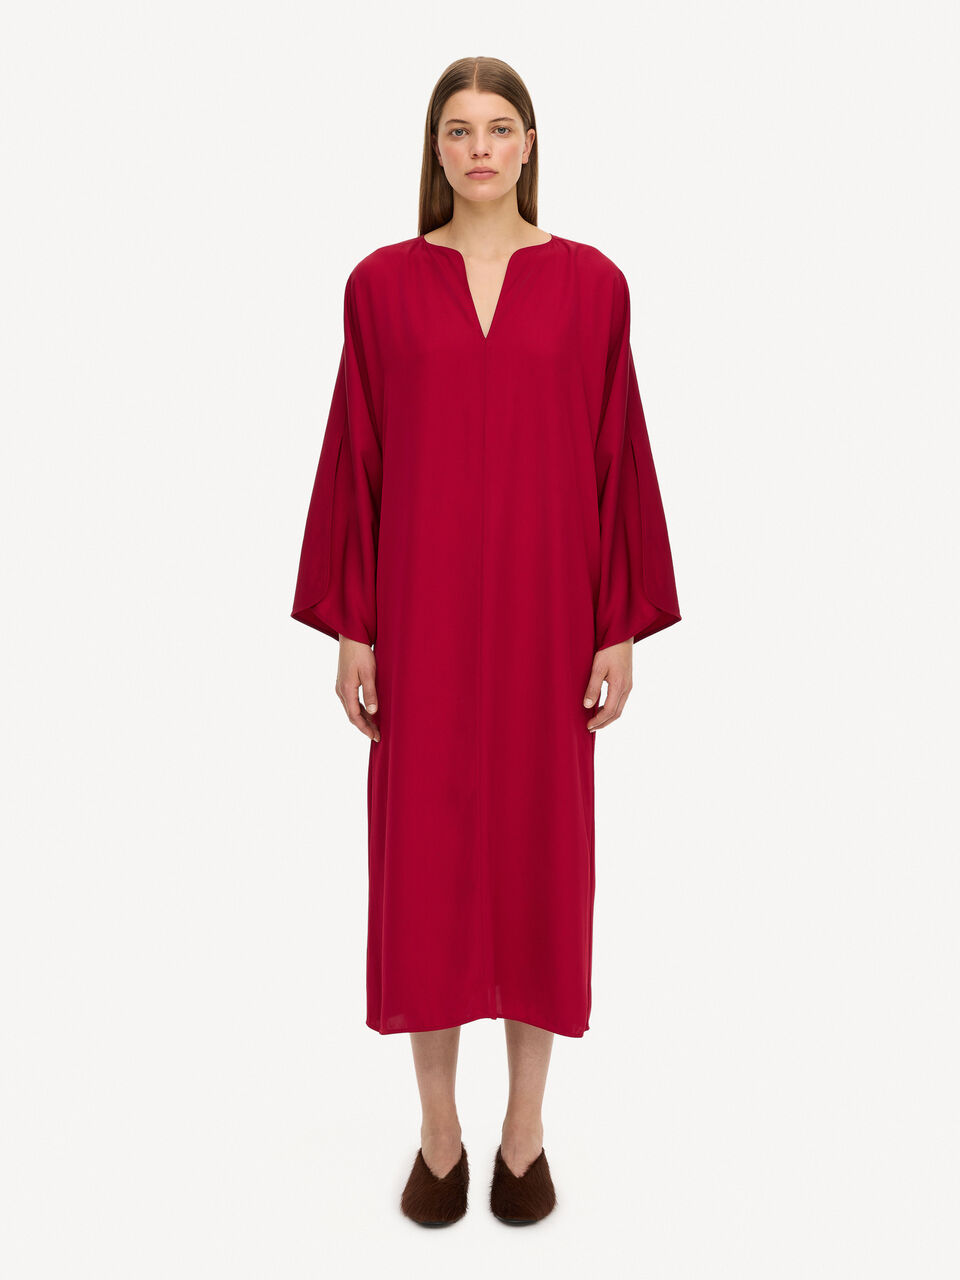 CAIS maxi dress, jester red